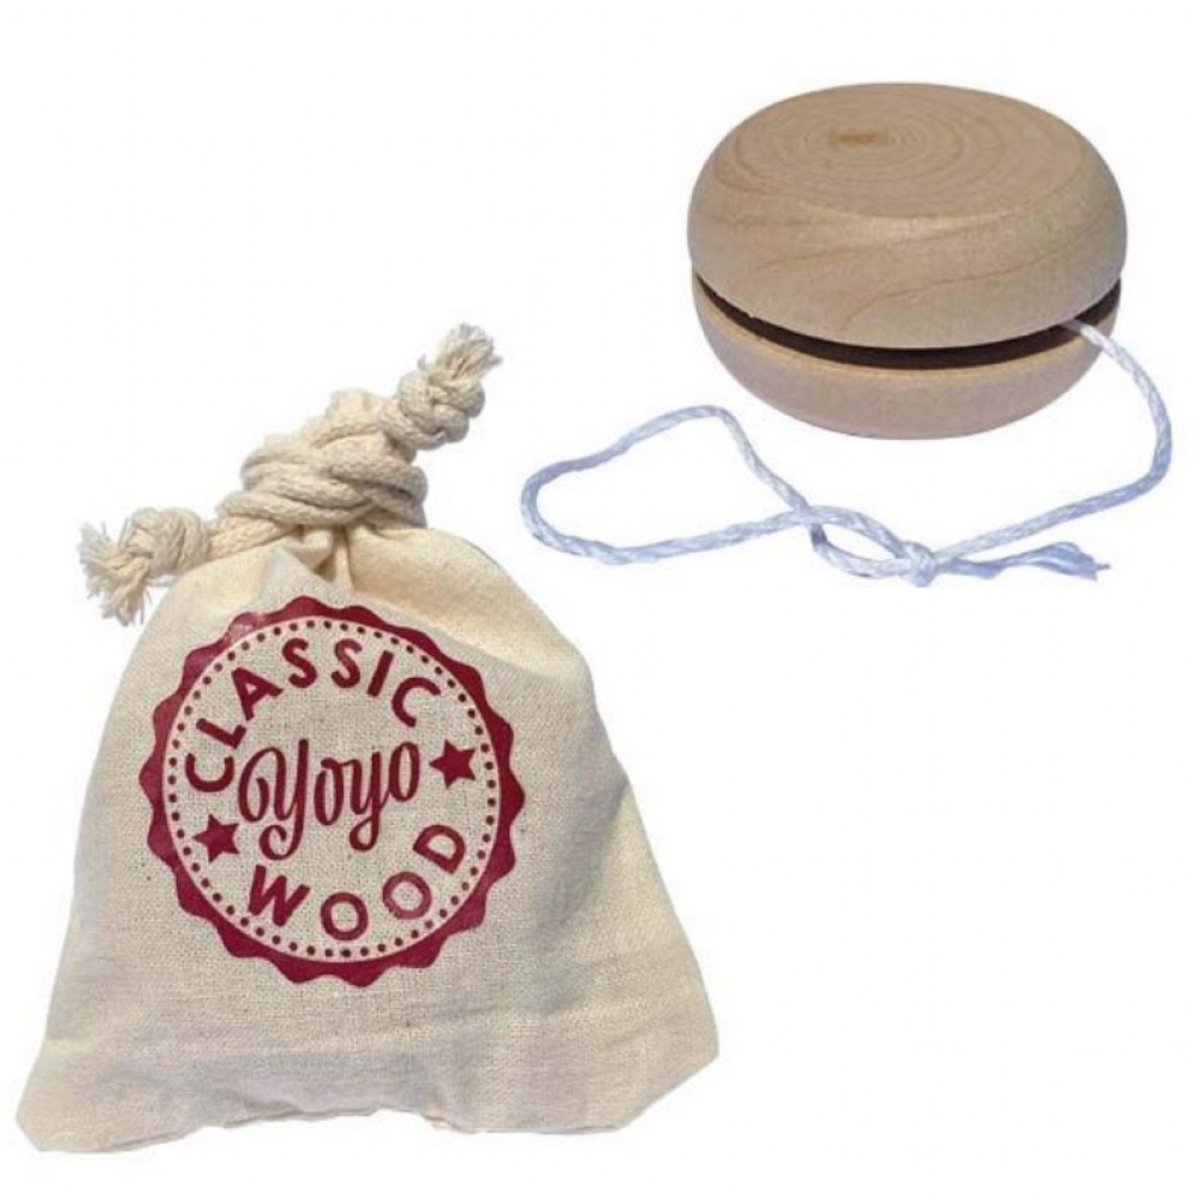 Wooden YoYo 5.5cm In Cotton Bag - Kids Party Craft